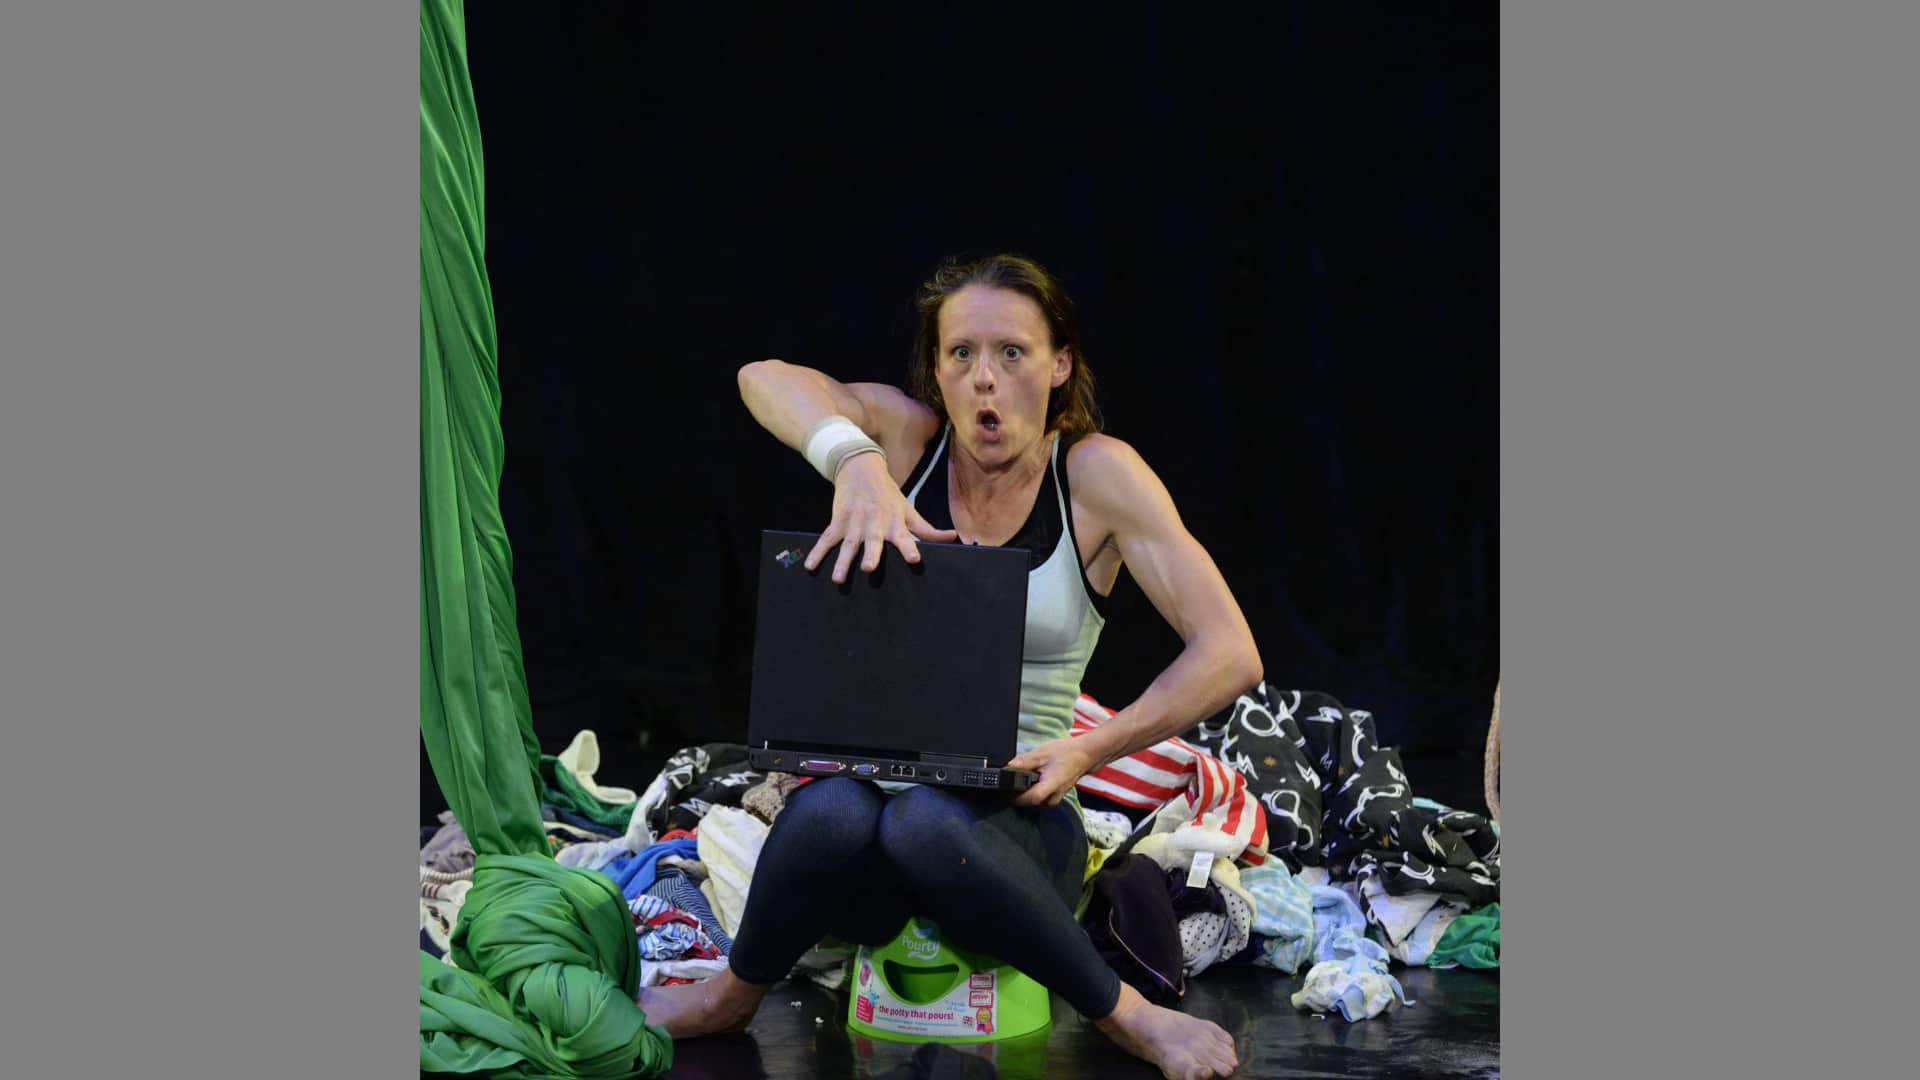 The performer makes to slam down the lid of her laptop. She is surrounded by piles of laundry. Her mouth forms a perfect o of exclamation